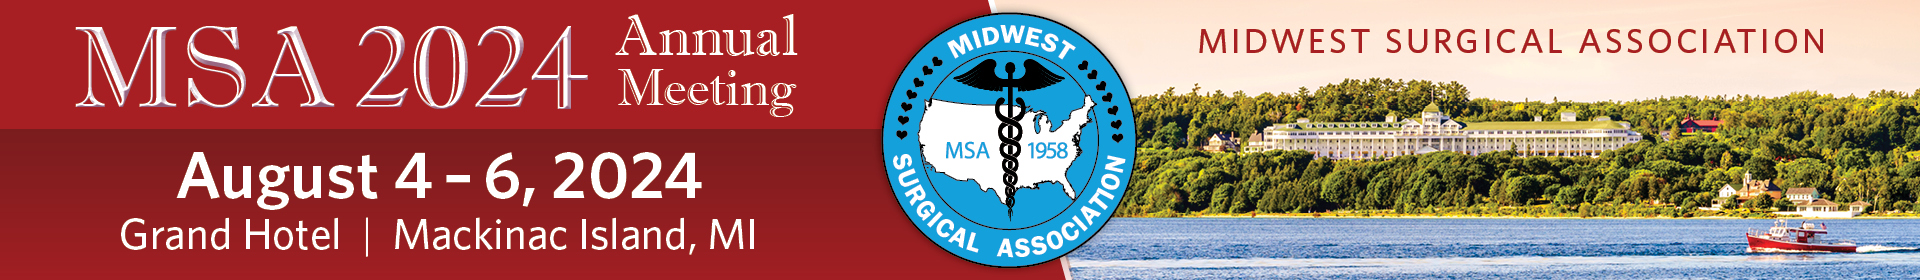 2024 Midwest Surgical Annual Meeting Event Banner